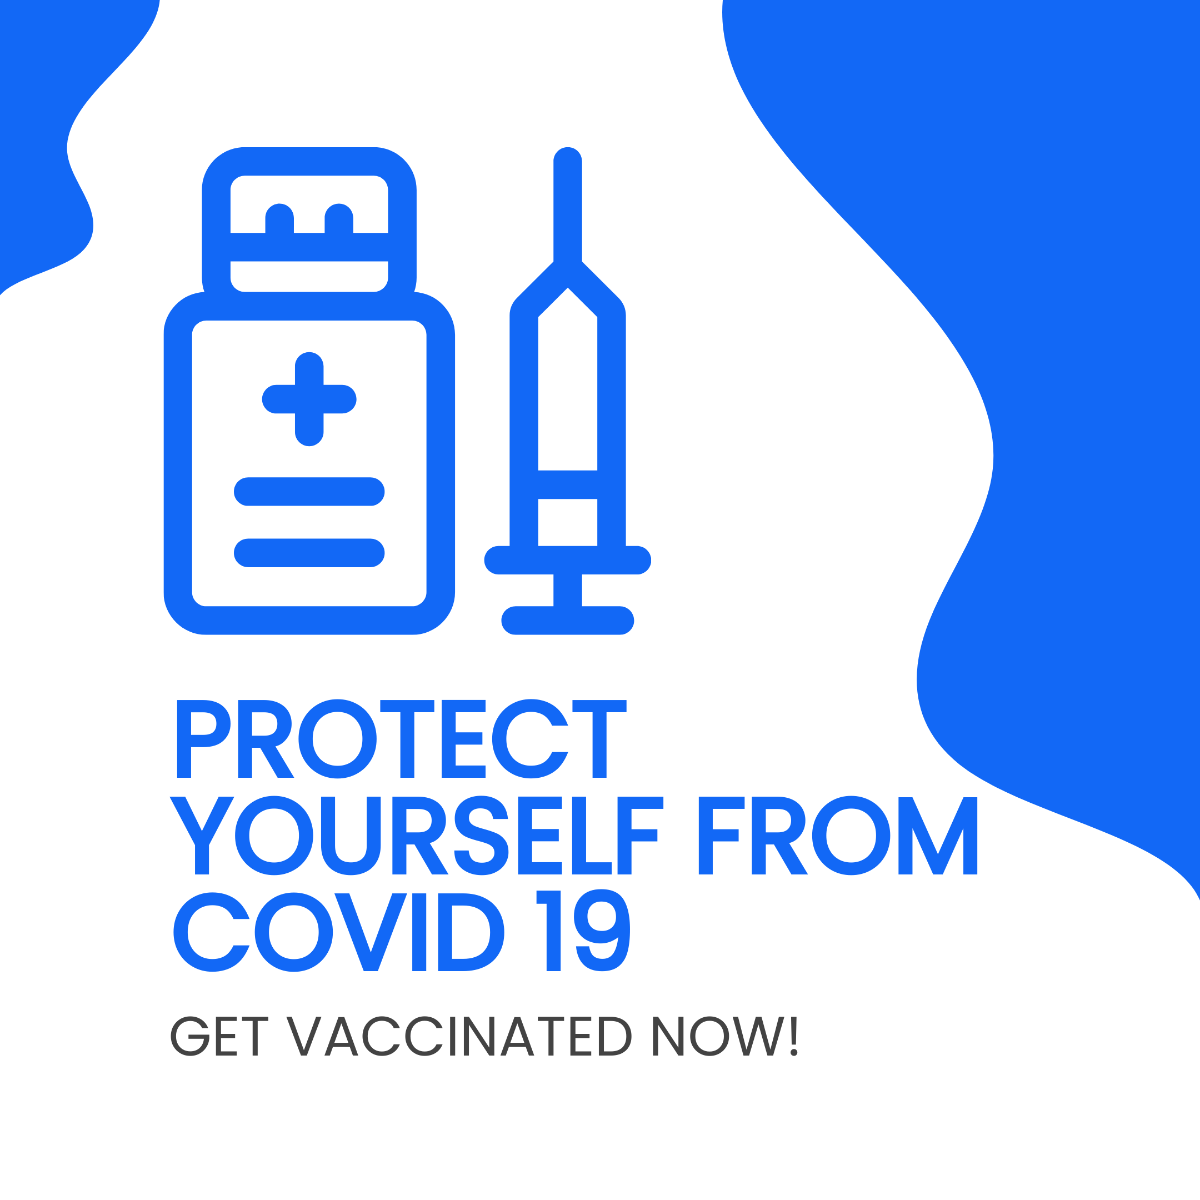 Free Covid 19 Vaccine Available Instagram Post Template